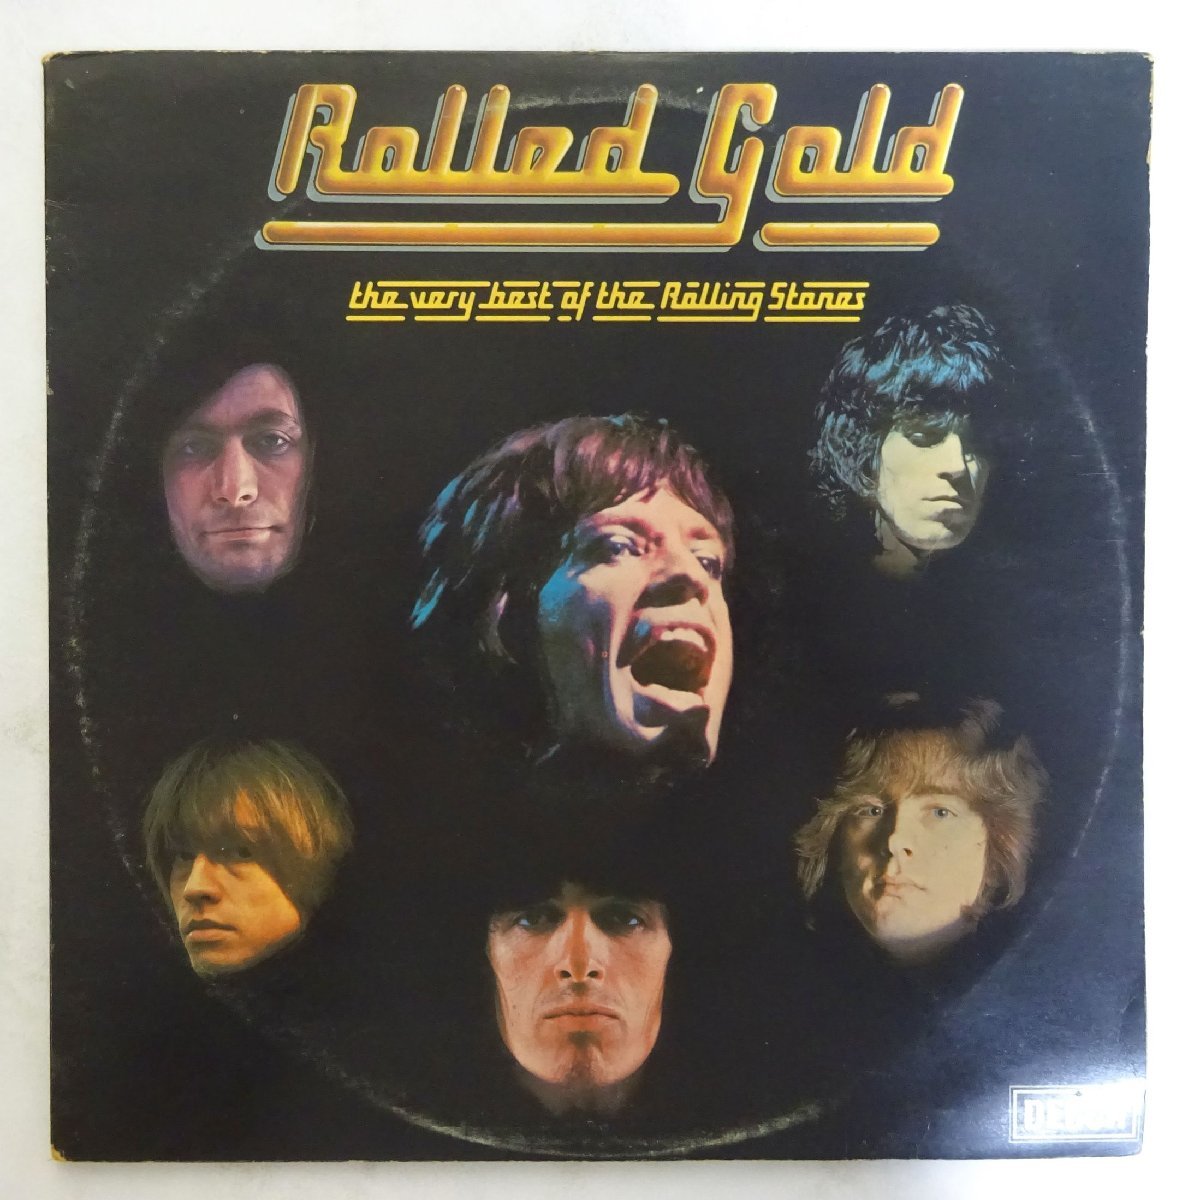 14028917;【UK盤/2LP/見開き】The Rolling Stones / Rolled Gold (The Very Best Of The Rolling Stones)_画像1